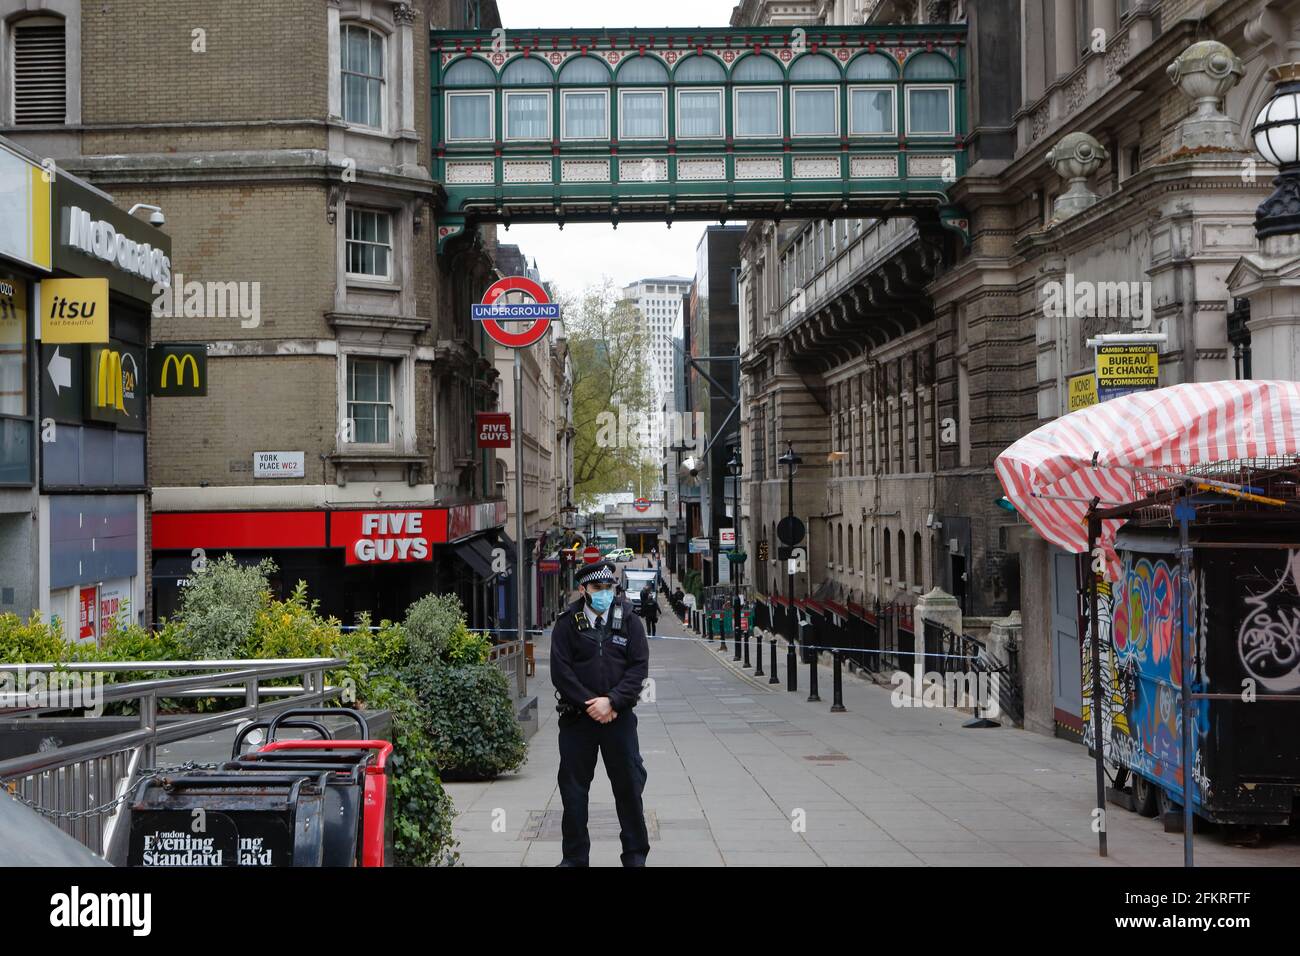 London (UK), 03 May 2021:Charing Cross Station is evacuated and closed after 'emergency incident' where police attended to a suspicious package in nea Stock Photo